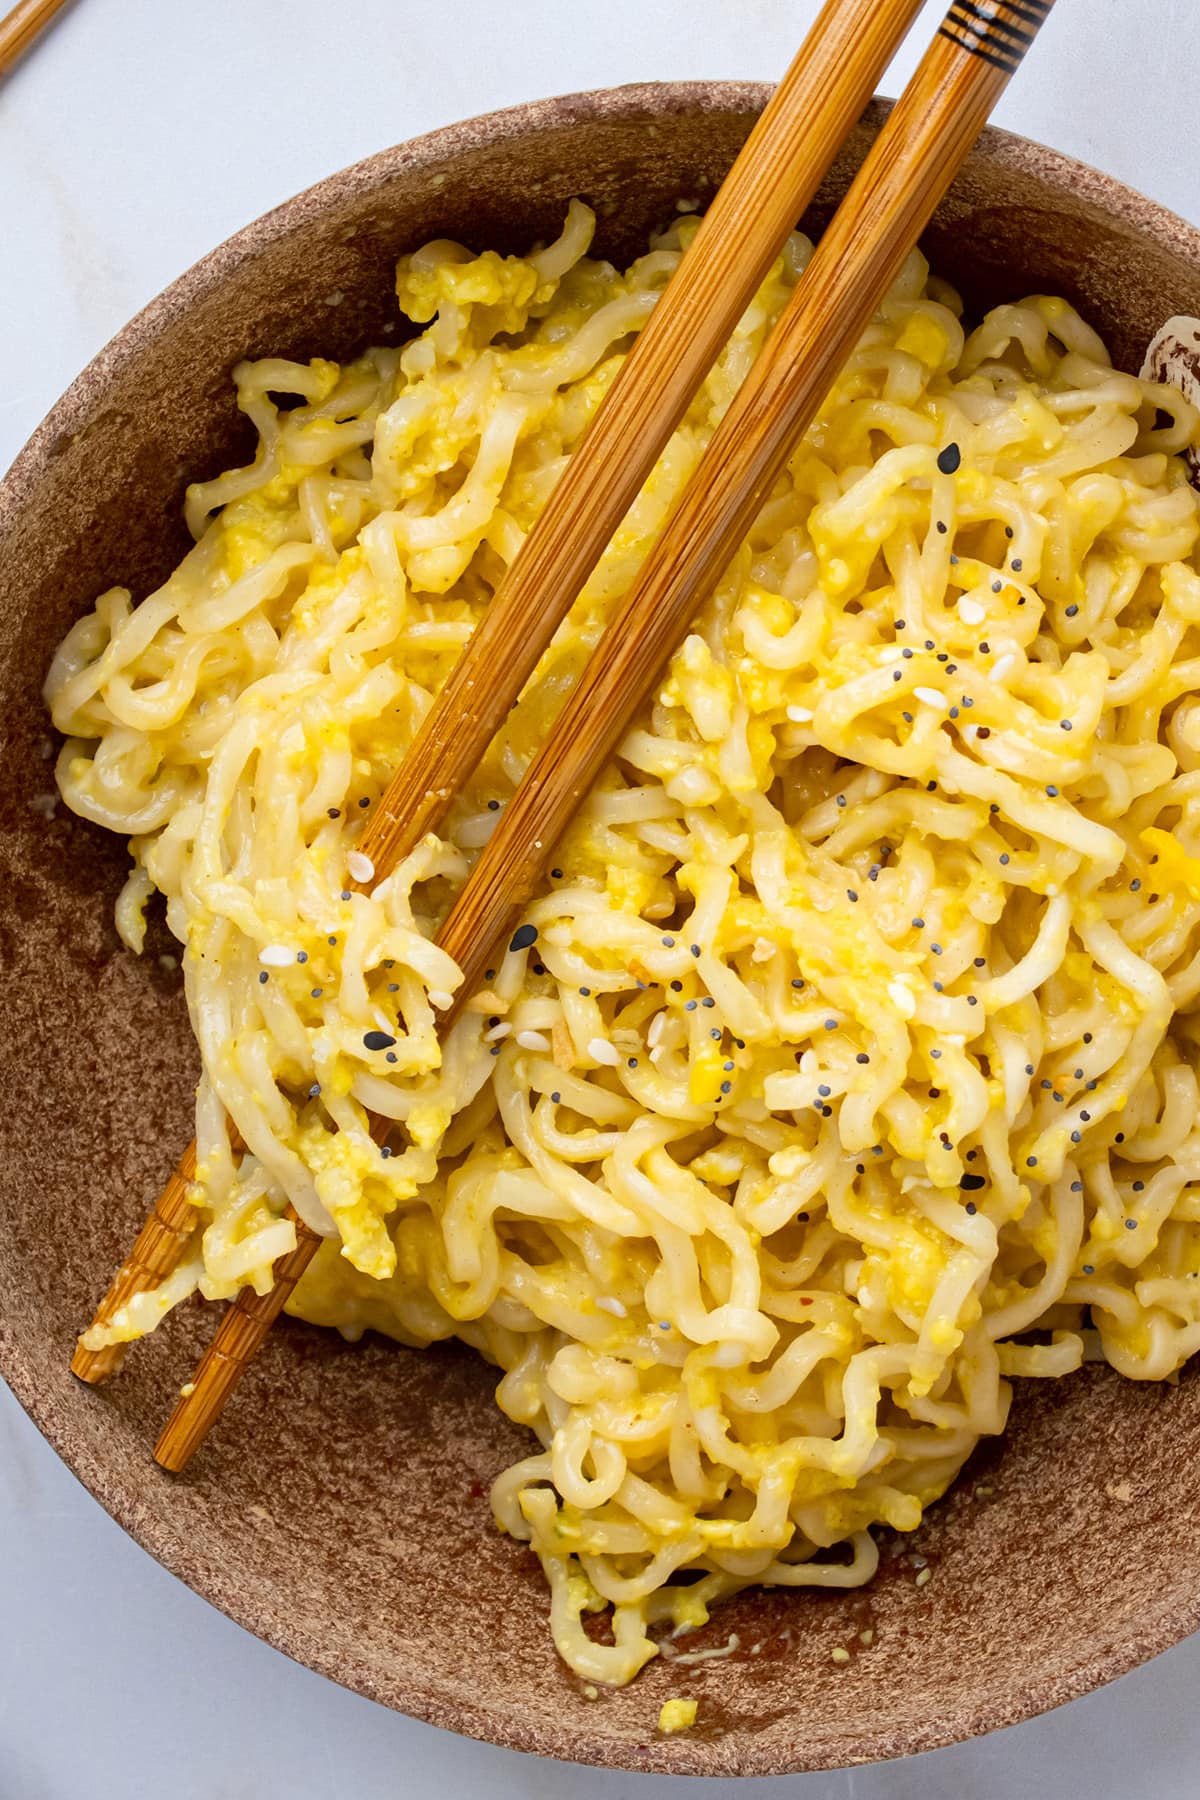 Close-up view of Kylie Jenner's ramen noodles, prepared and served in a brown bowl with a set of wooden chopsticks.